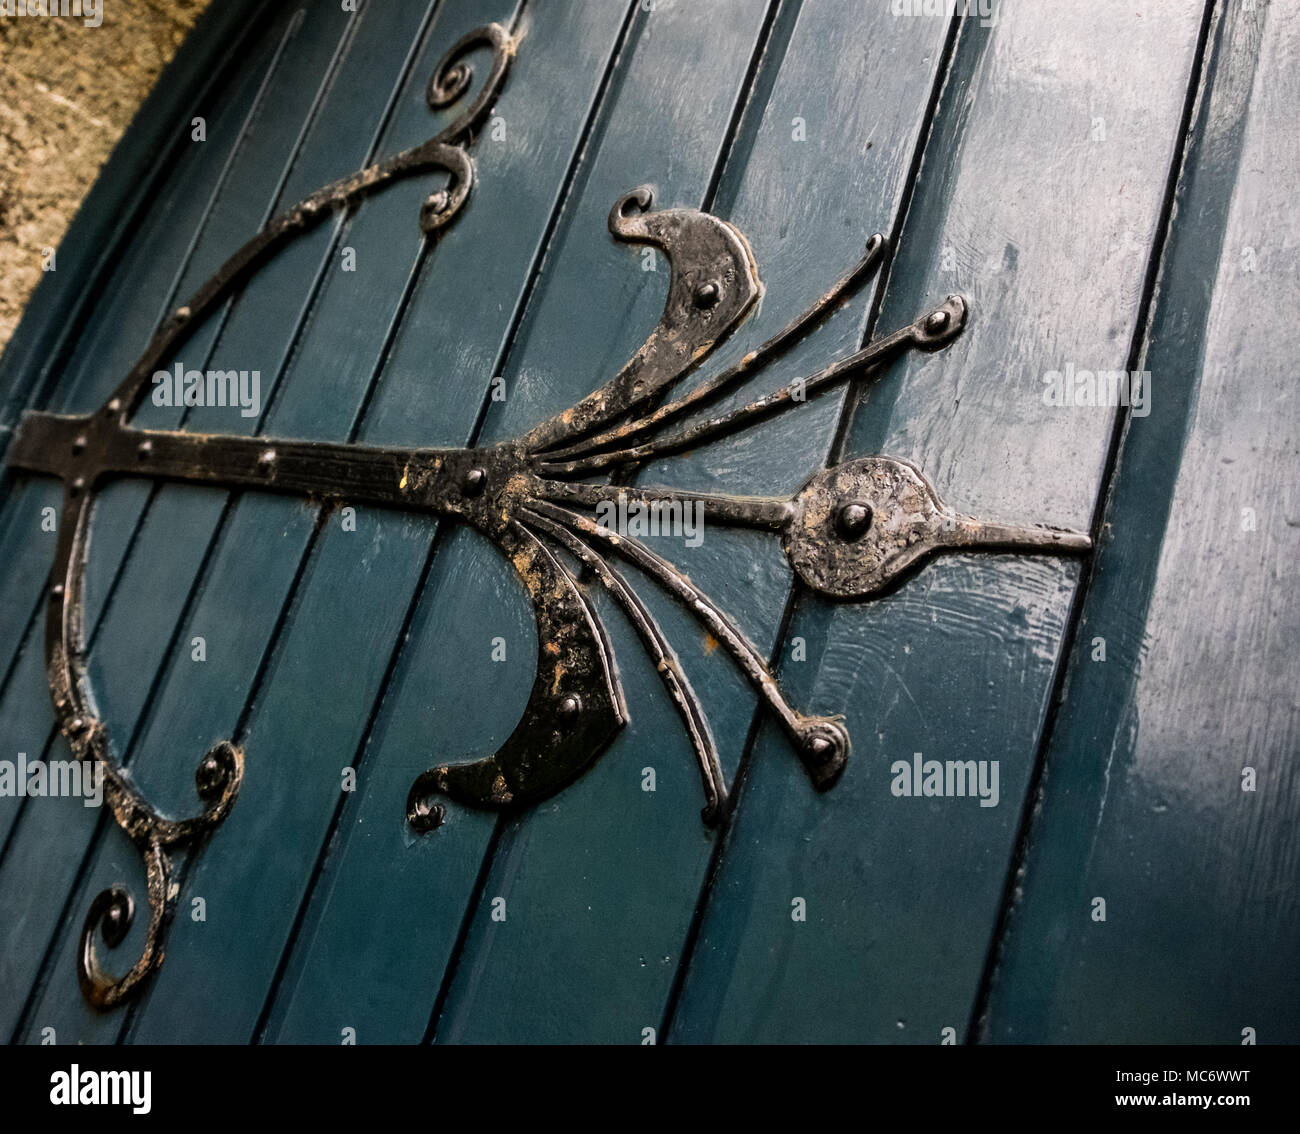 Massive Church door hinge in black painted wrought iron work on dark blue door, a bit like a bow and arrows design. Stock Photo